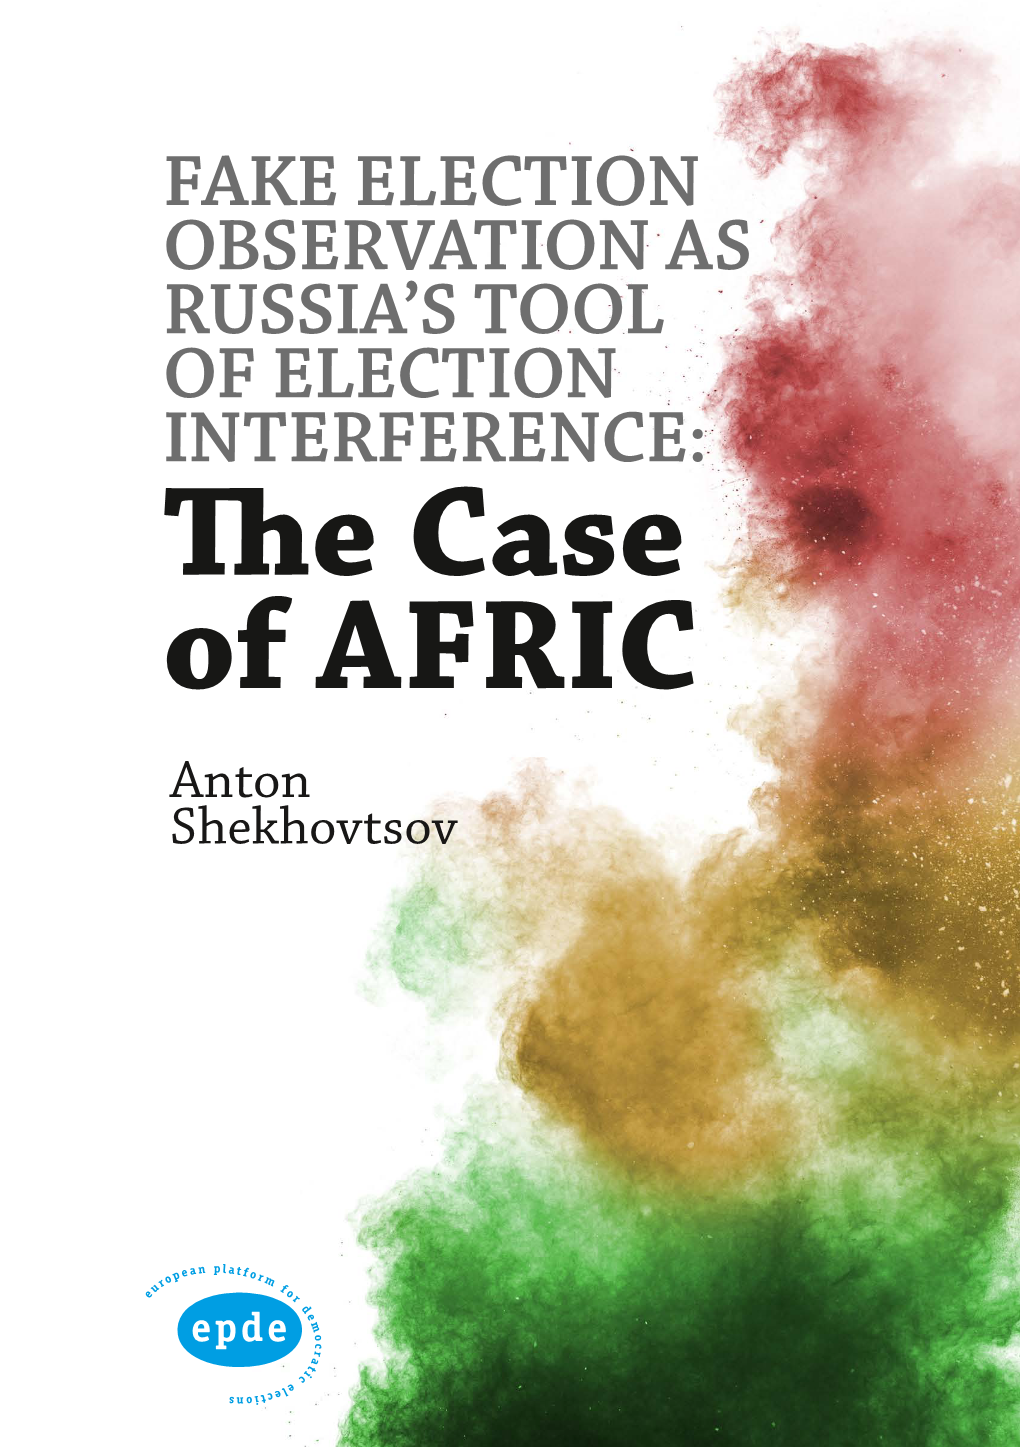 The Case of AFRIC Anton Shekhovtsov FAKE ELECTION OBSERVATION AS RUSSIA’S TOOL of ELECTION INTERFERENCE: the Case of AFRIC